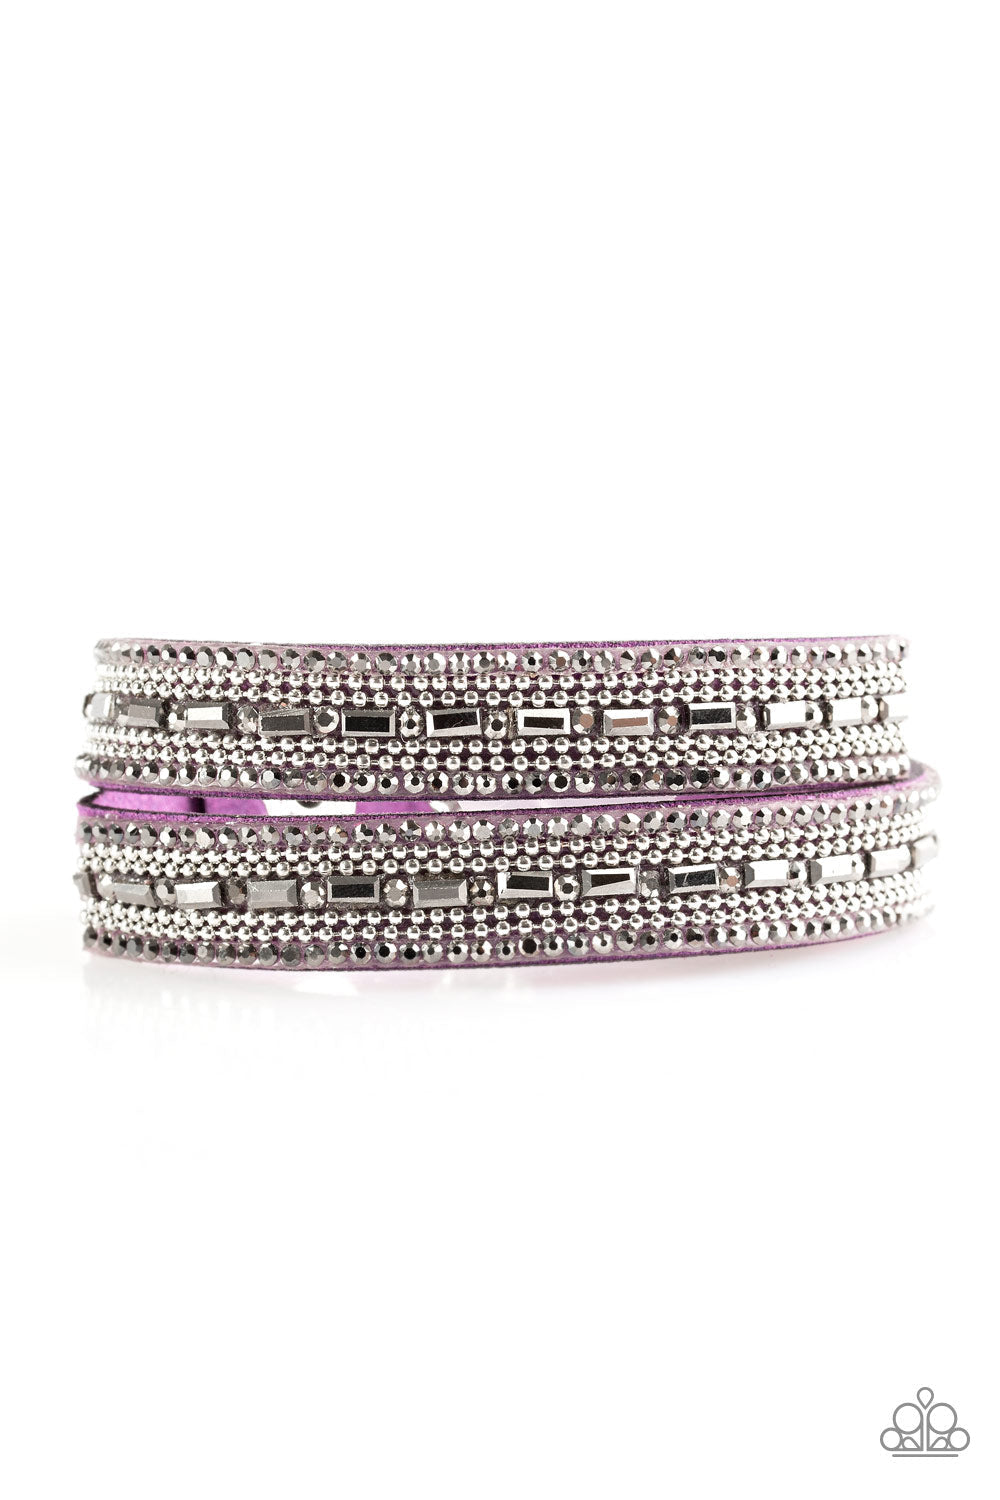 Shimmer and Sass - Purple Suede - Wrap and Snap Bracelet - Paparazzi Accessories - Featuring round and emerald style cuts, glassy hematite rhinestones are encrusted along a purple suede band. Rows of shimmery silver ball chain are pressed into the glittery band for a sassy finish. The elongated band allows for a trendy double wrap design. Features an adjustable snap closure. Sold as one individual bracelet.